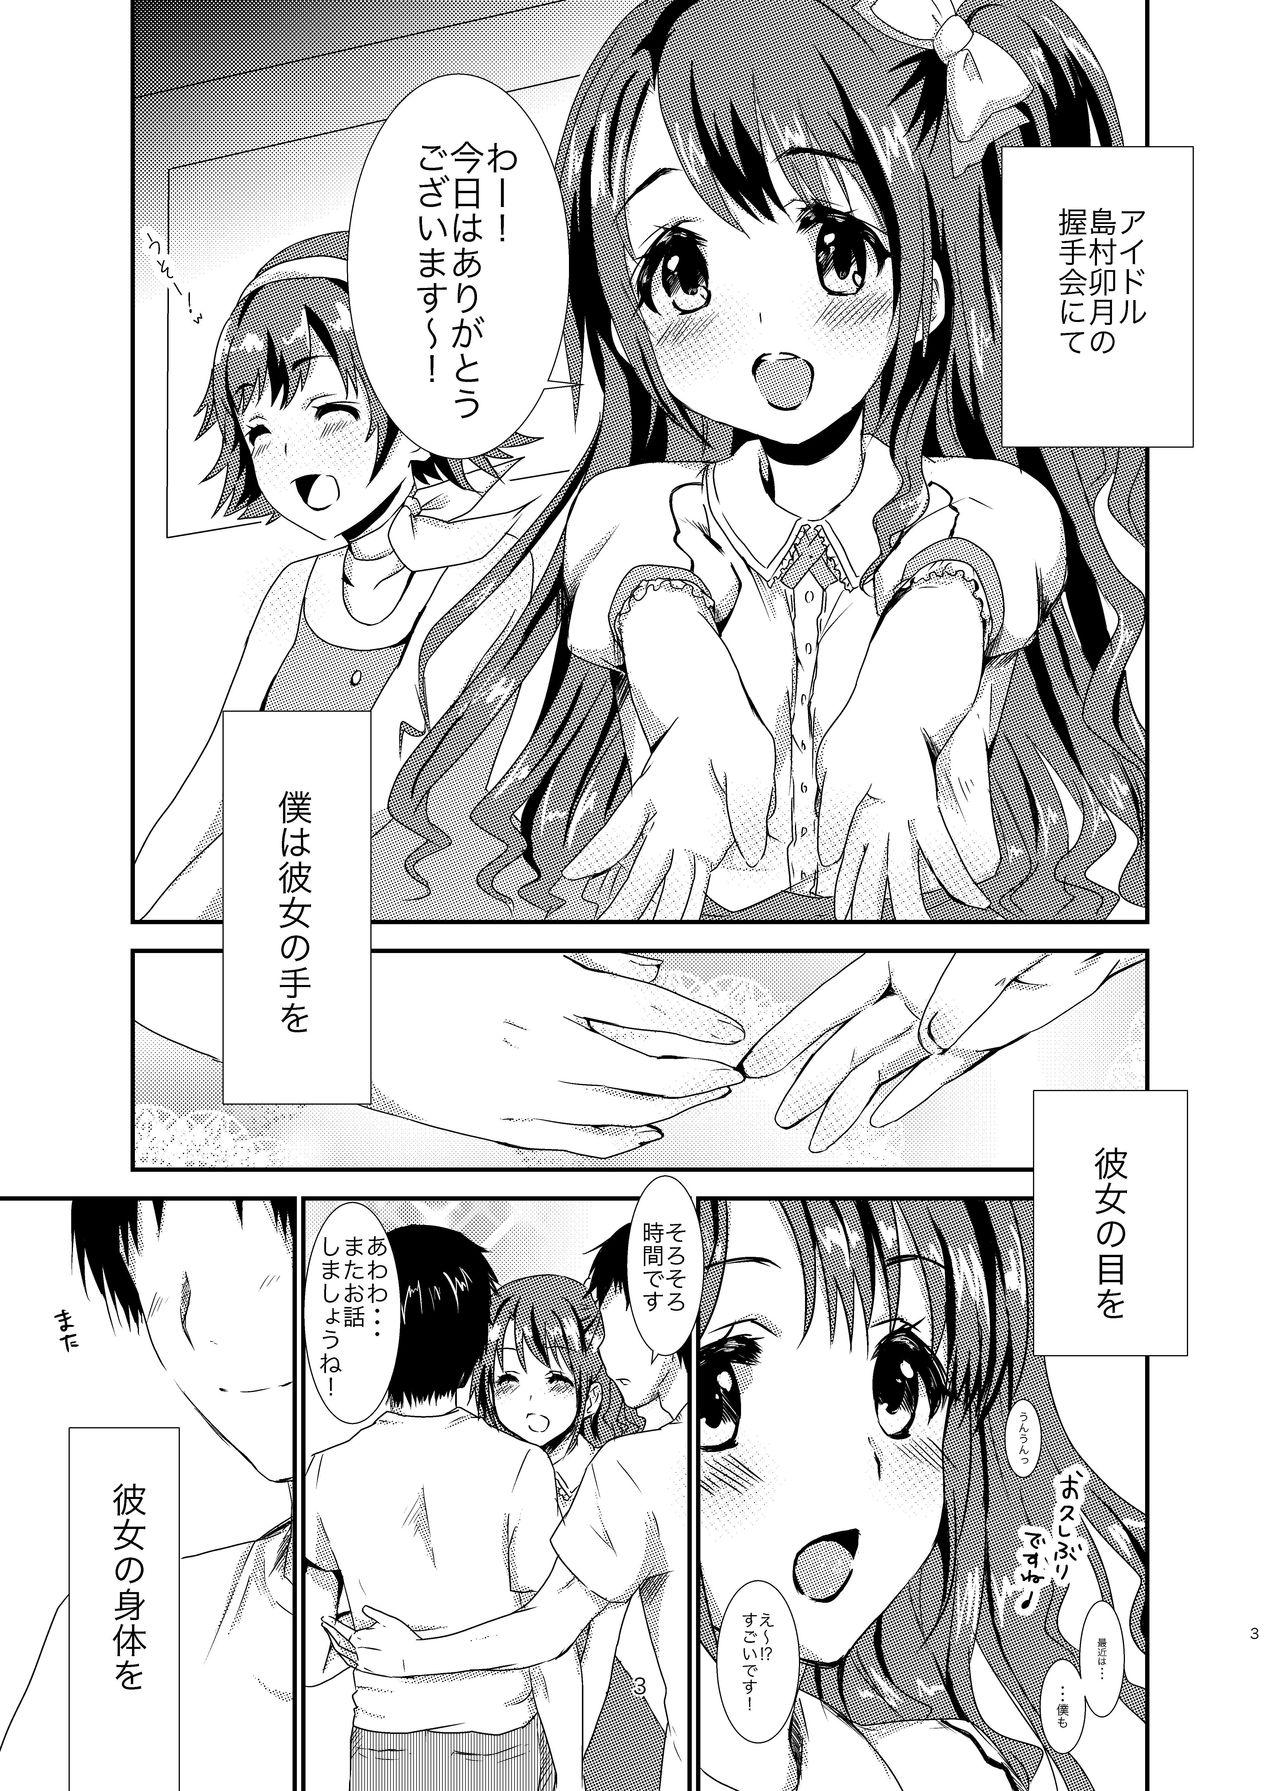 Chile office+love2 - The idolmaster Lesbian Sex - Page 2